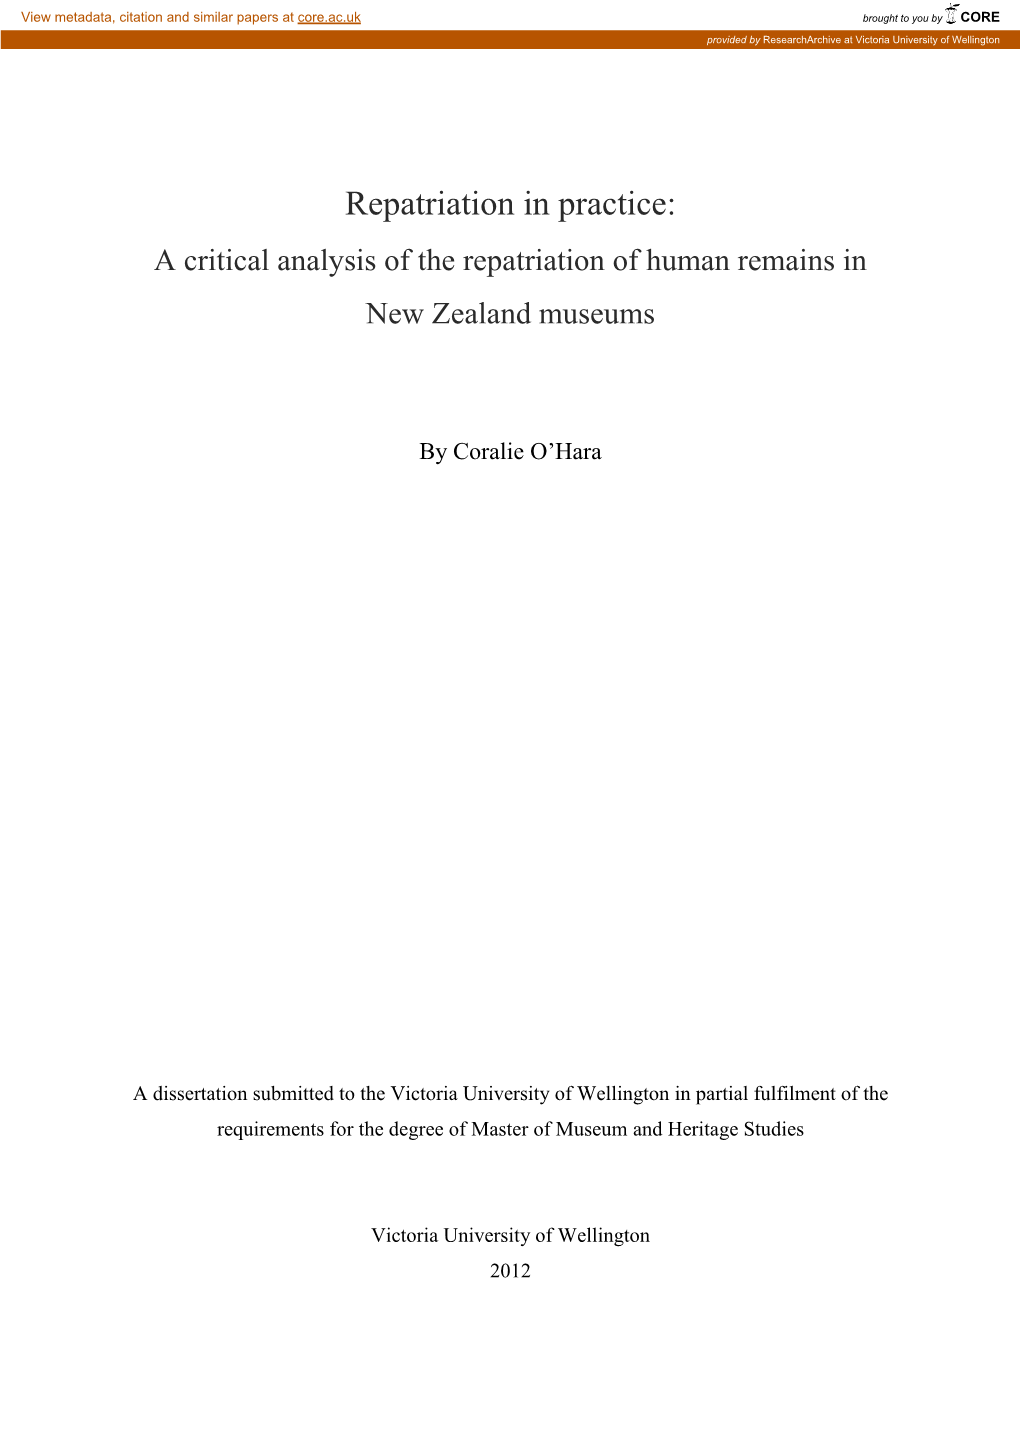 Repatriation in Practice: a Critical Analysis of the Repatriation of Human Remains in New Zealand Museums